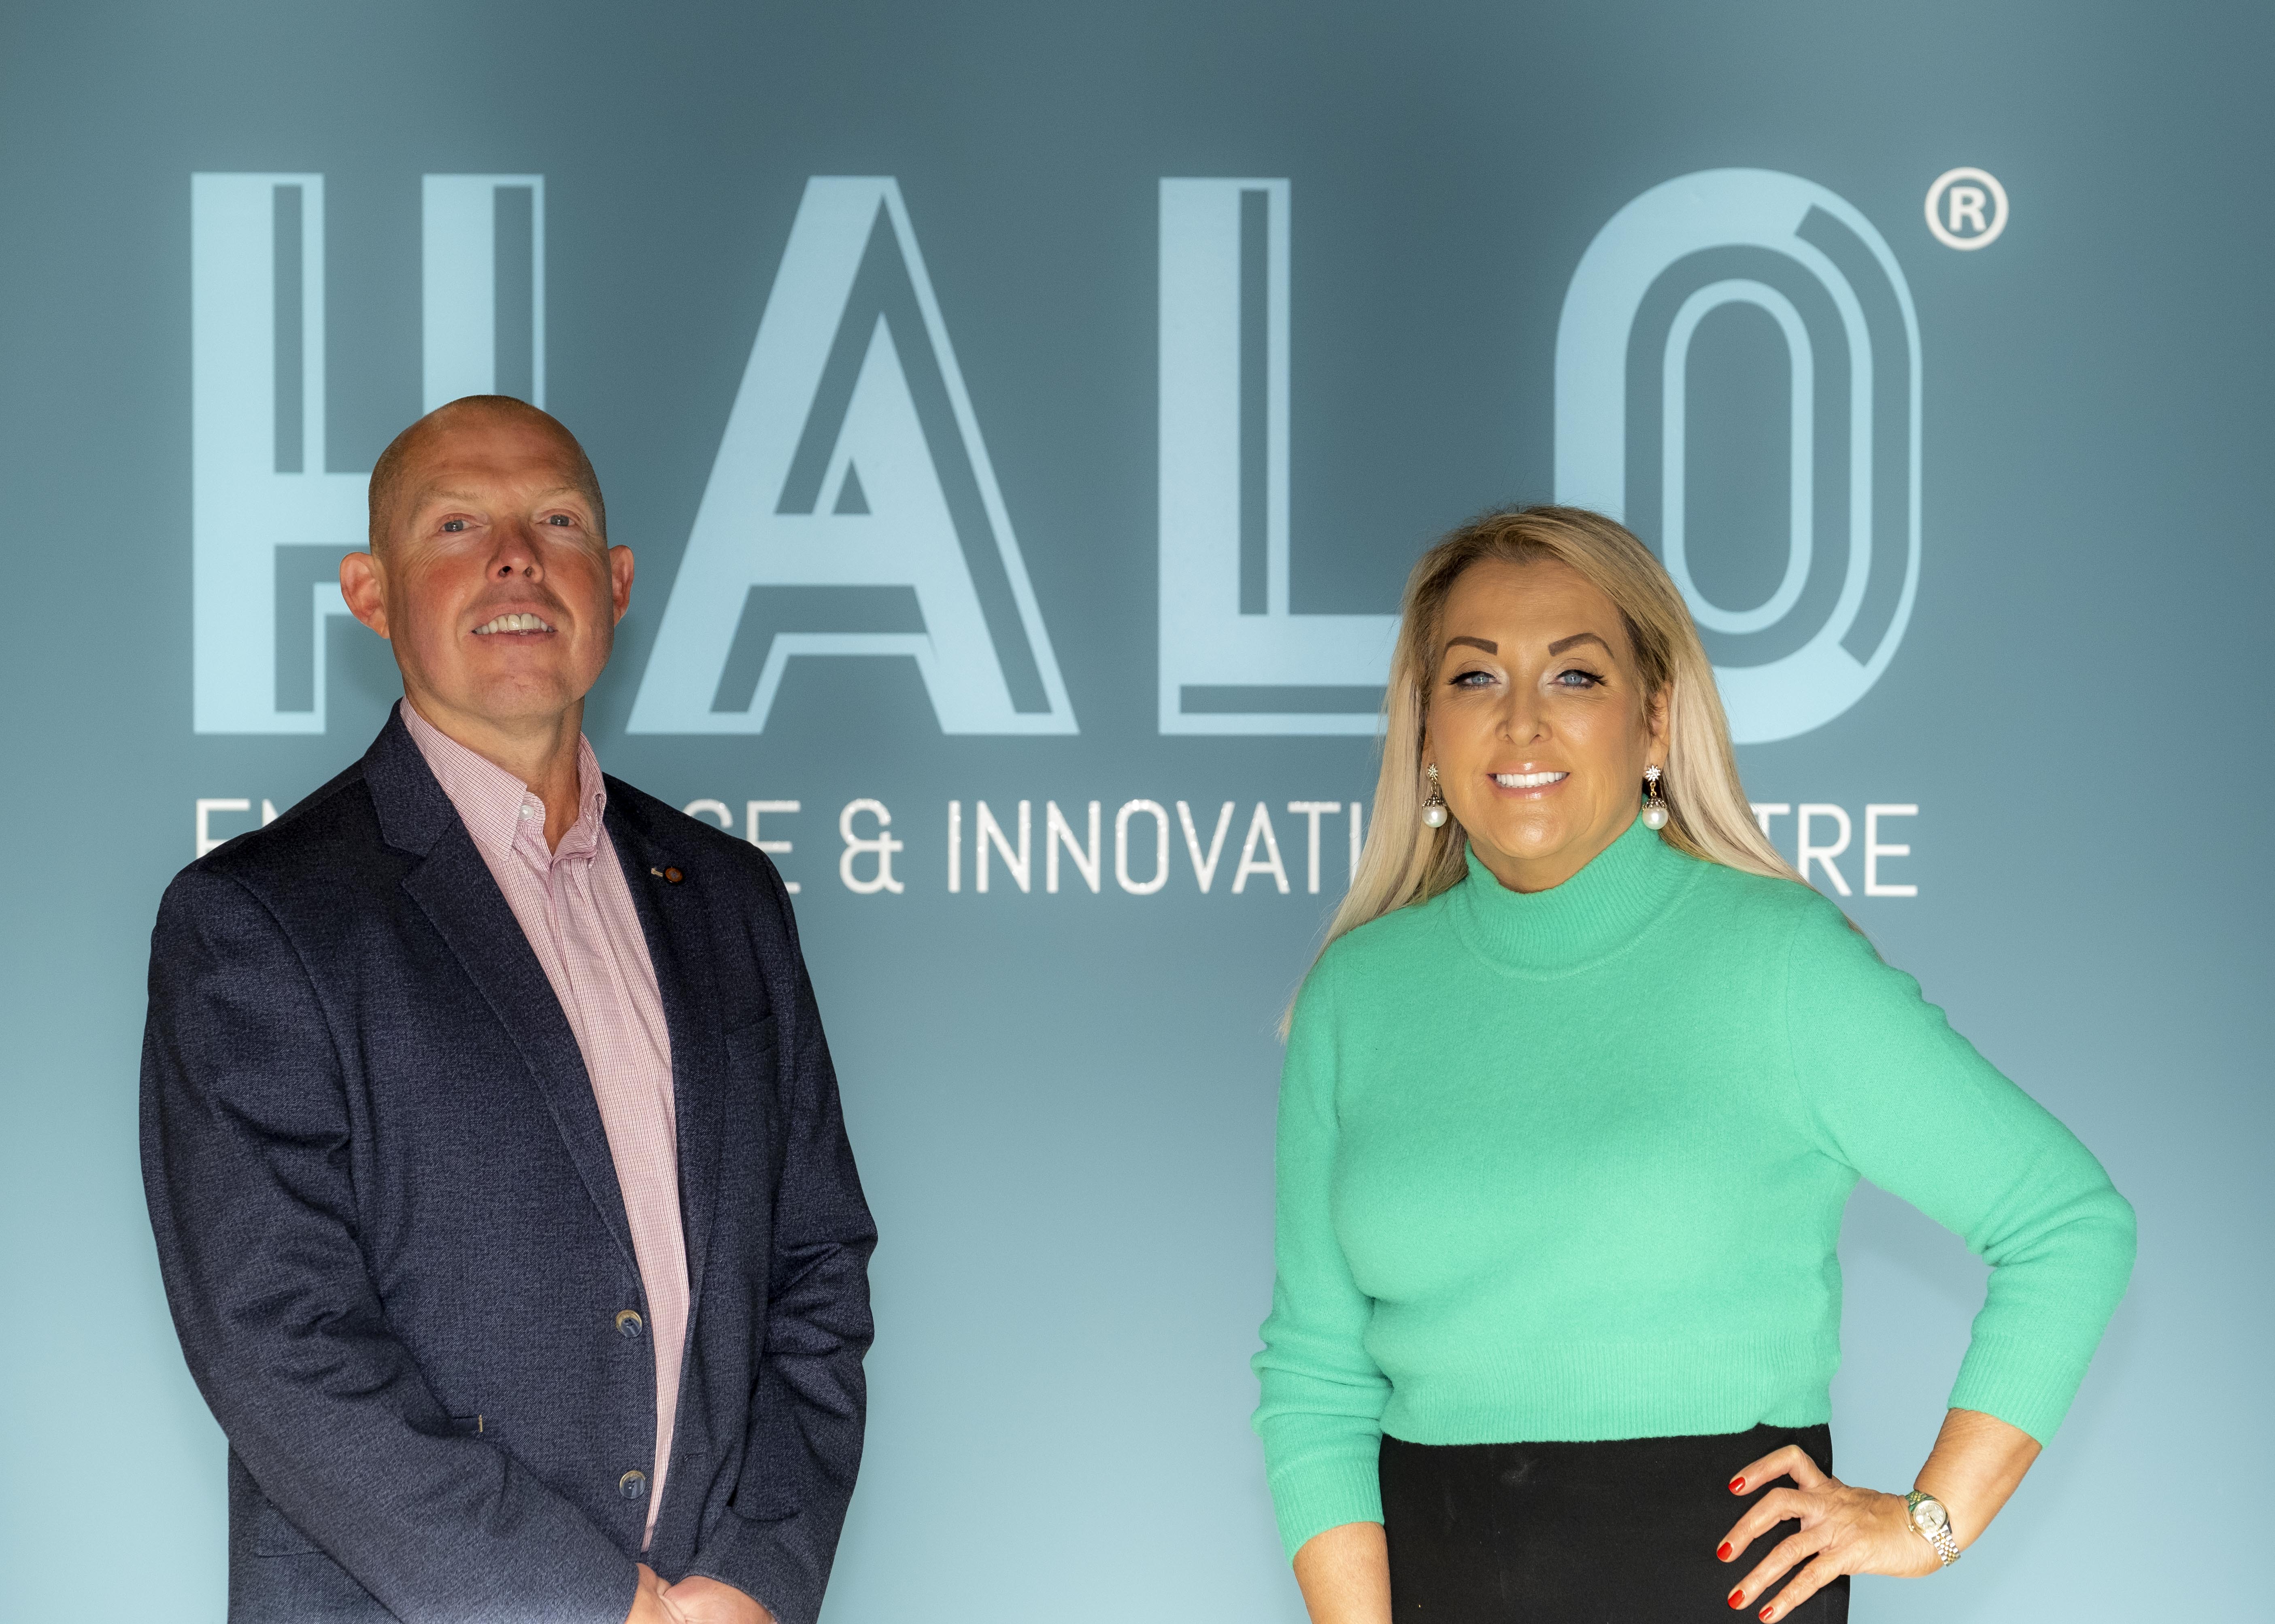 PRA Group finds sustainable home at The HALO Kilmarnock